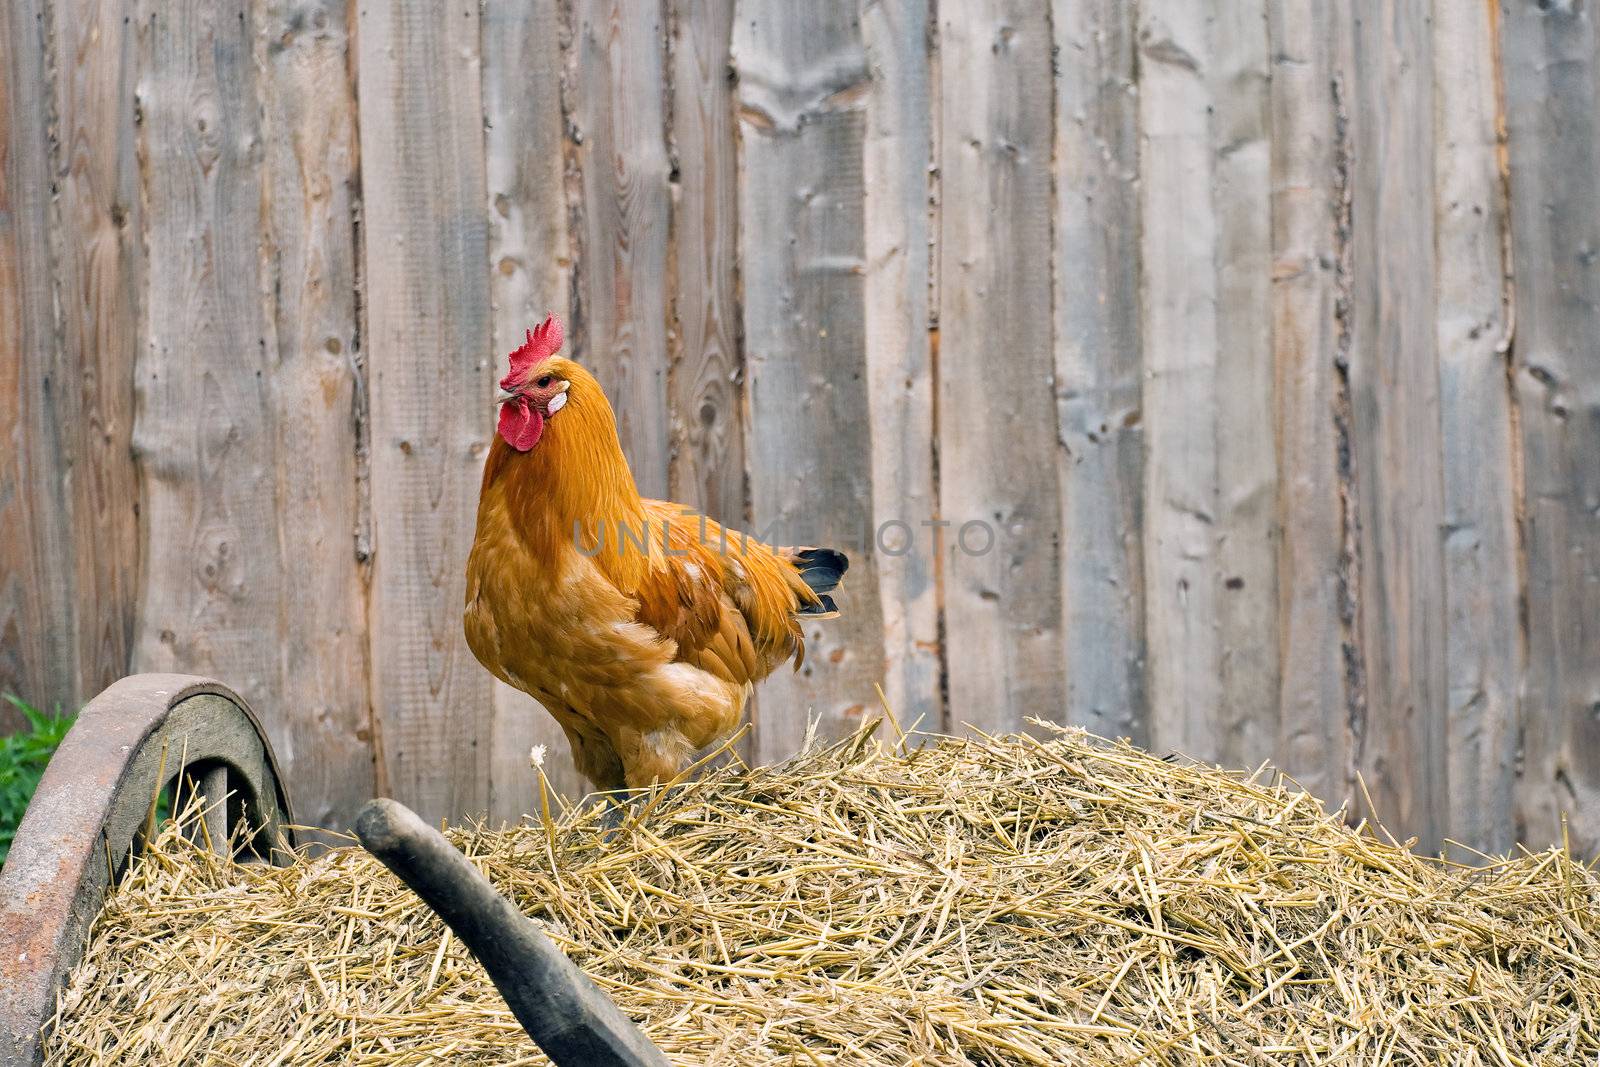 Rooster on the cart with straw near a wooden fence